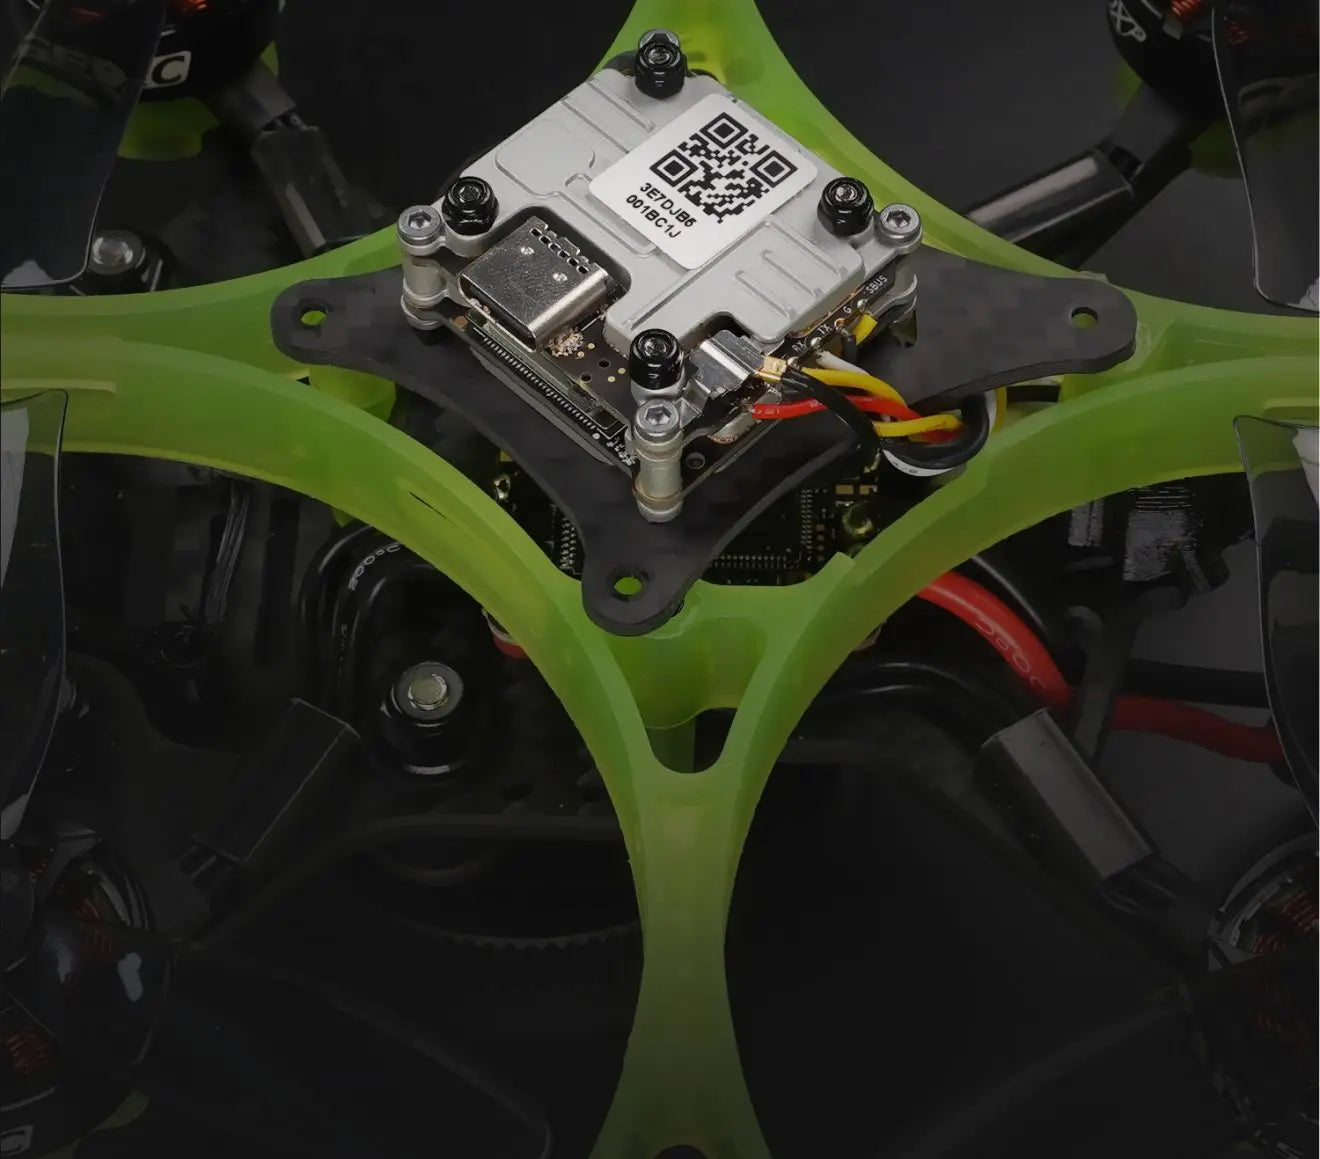 GEPRC CineLog35 Cinewhoop FPV Drone, Nebula Pro has better imaging effects, clearer FPV images, and better color